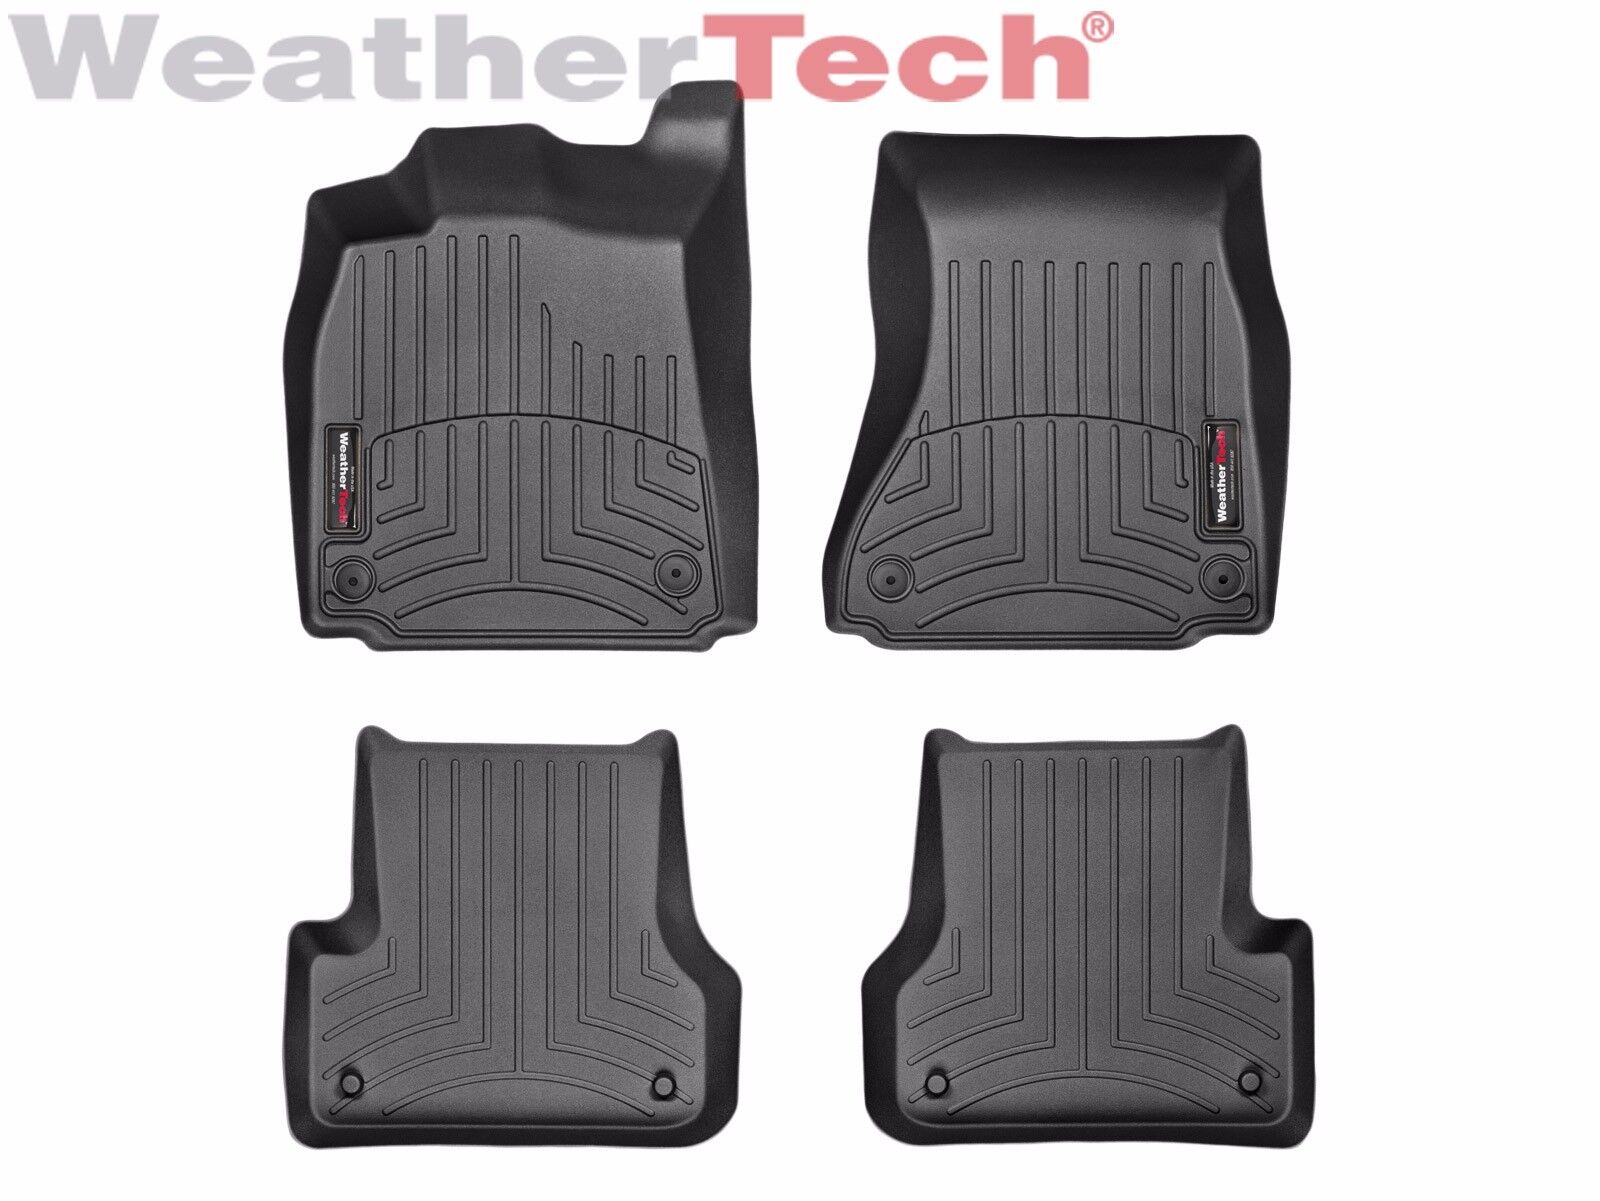 WeatherTech Car Floor Liner for Audi A6/S6/A7/S7/RS7 - 1st & 2nd Row - Black